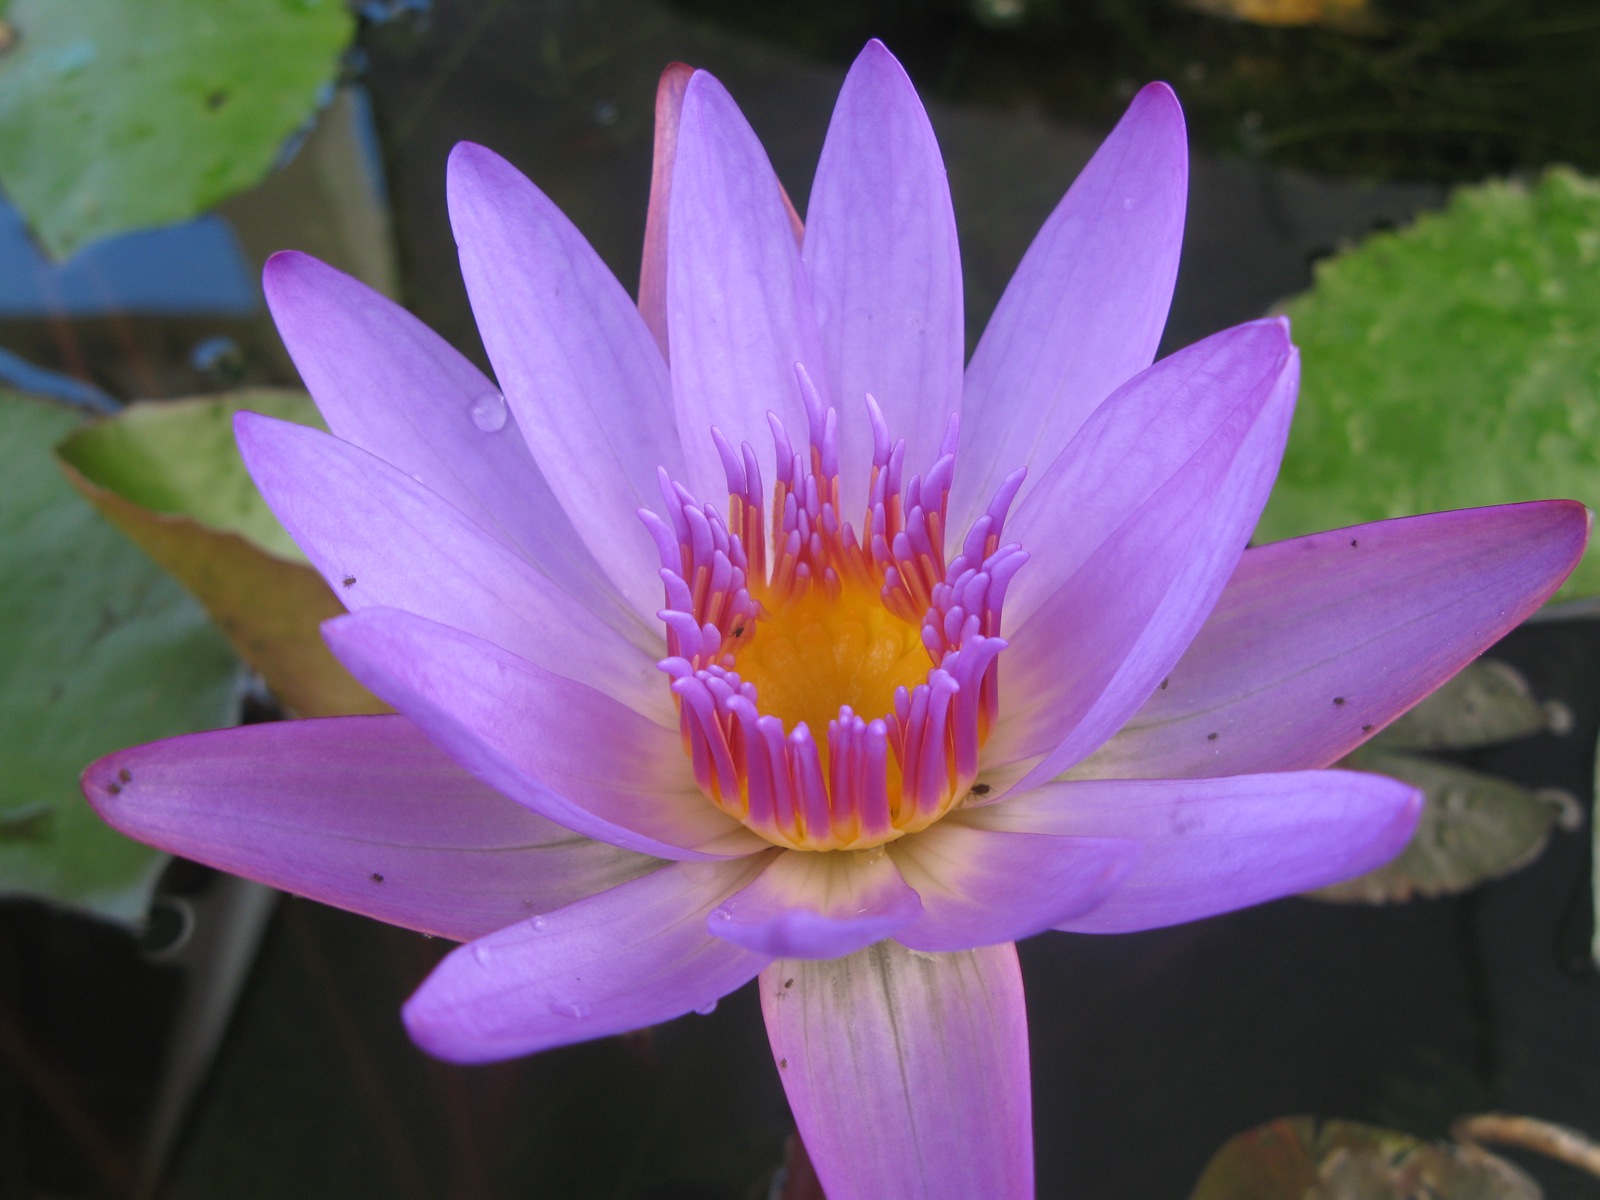 the purple water lily is blooming in the pond